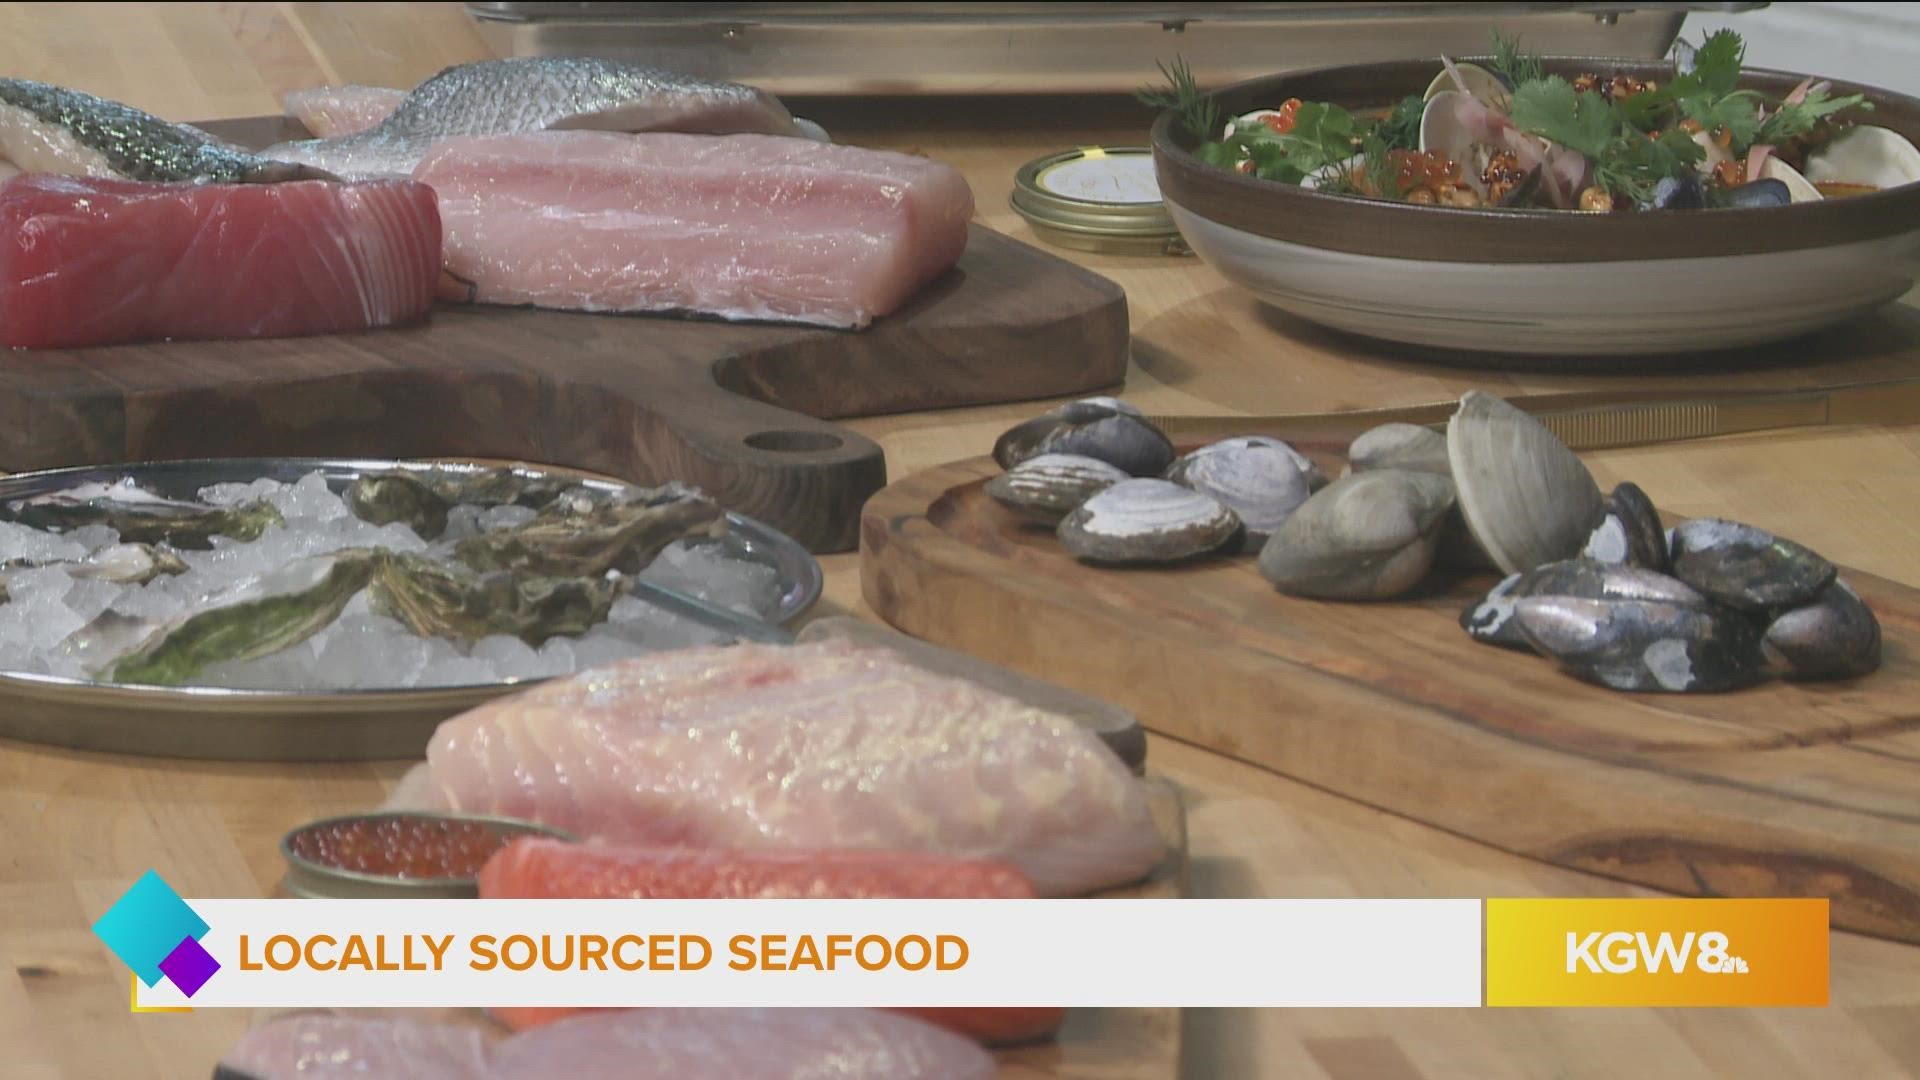 Flying Fish tells us what's in season and how to get the freshest seafood for your table